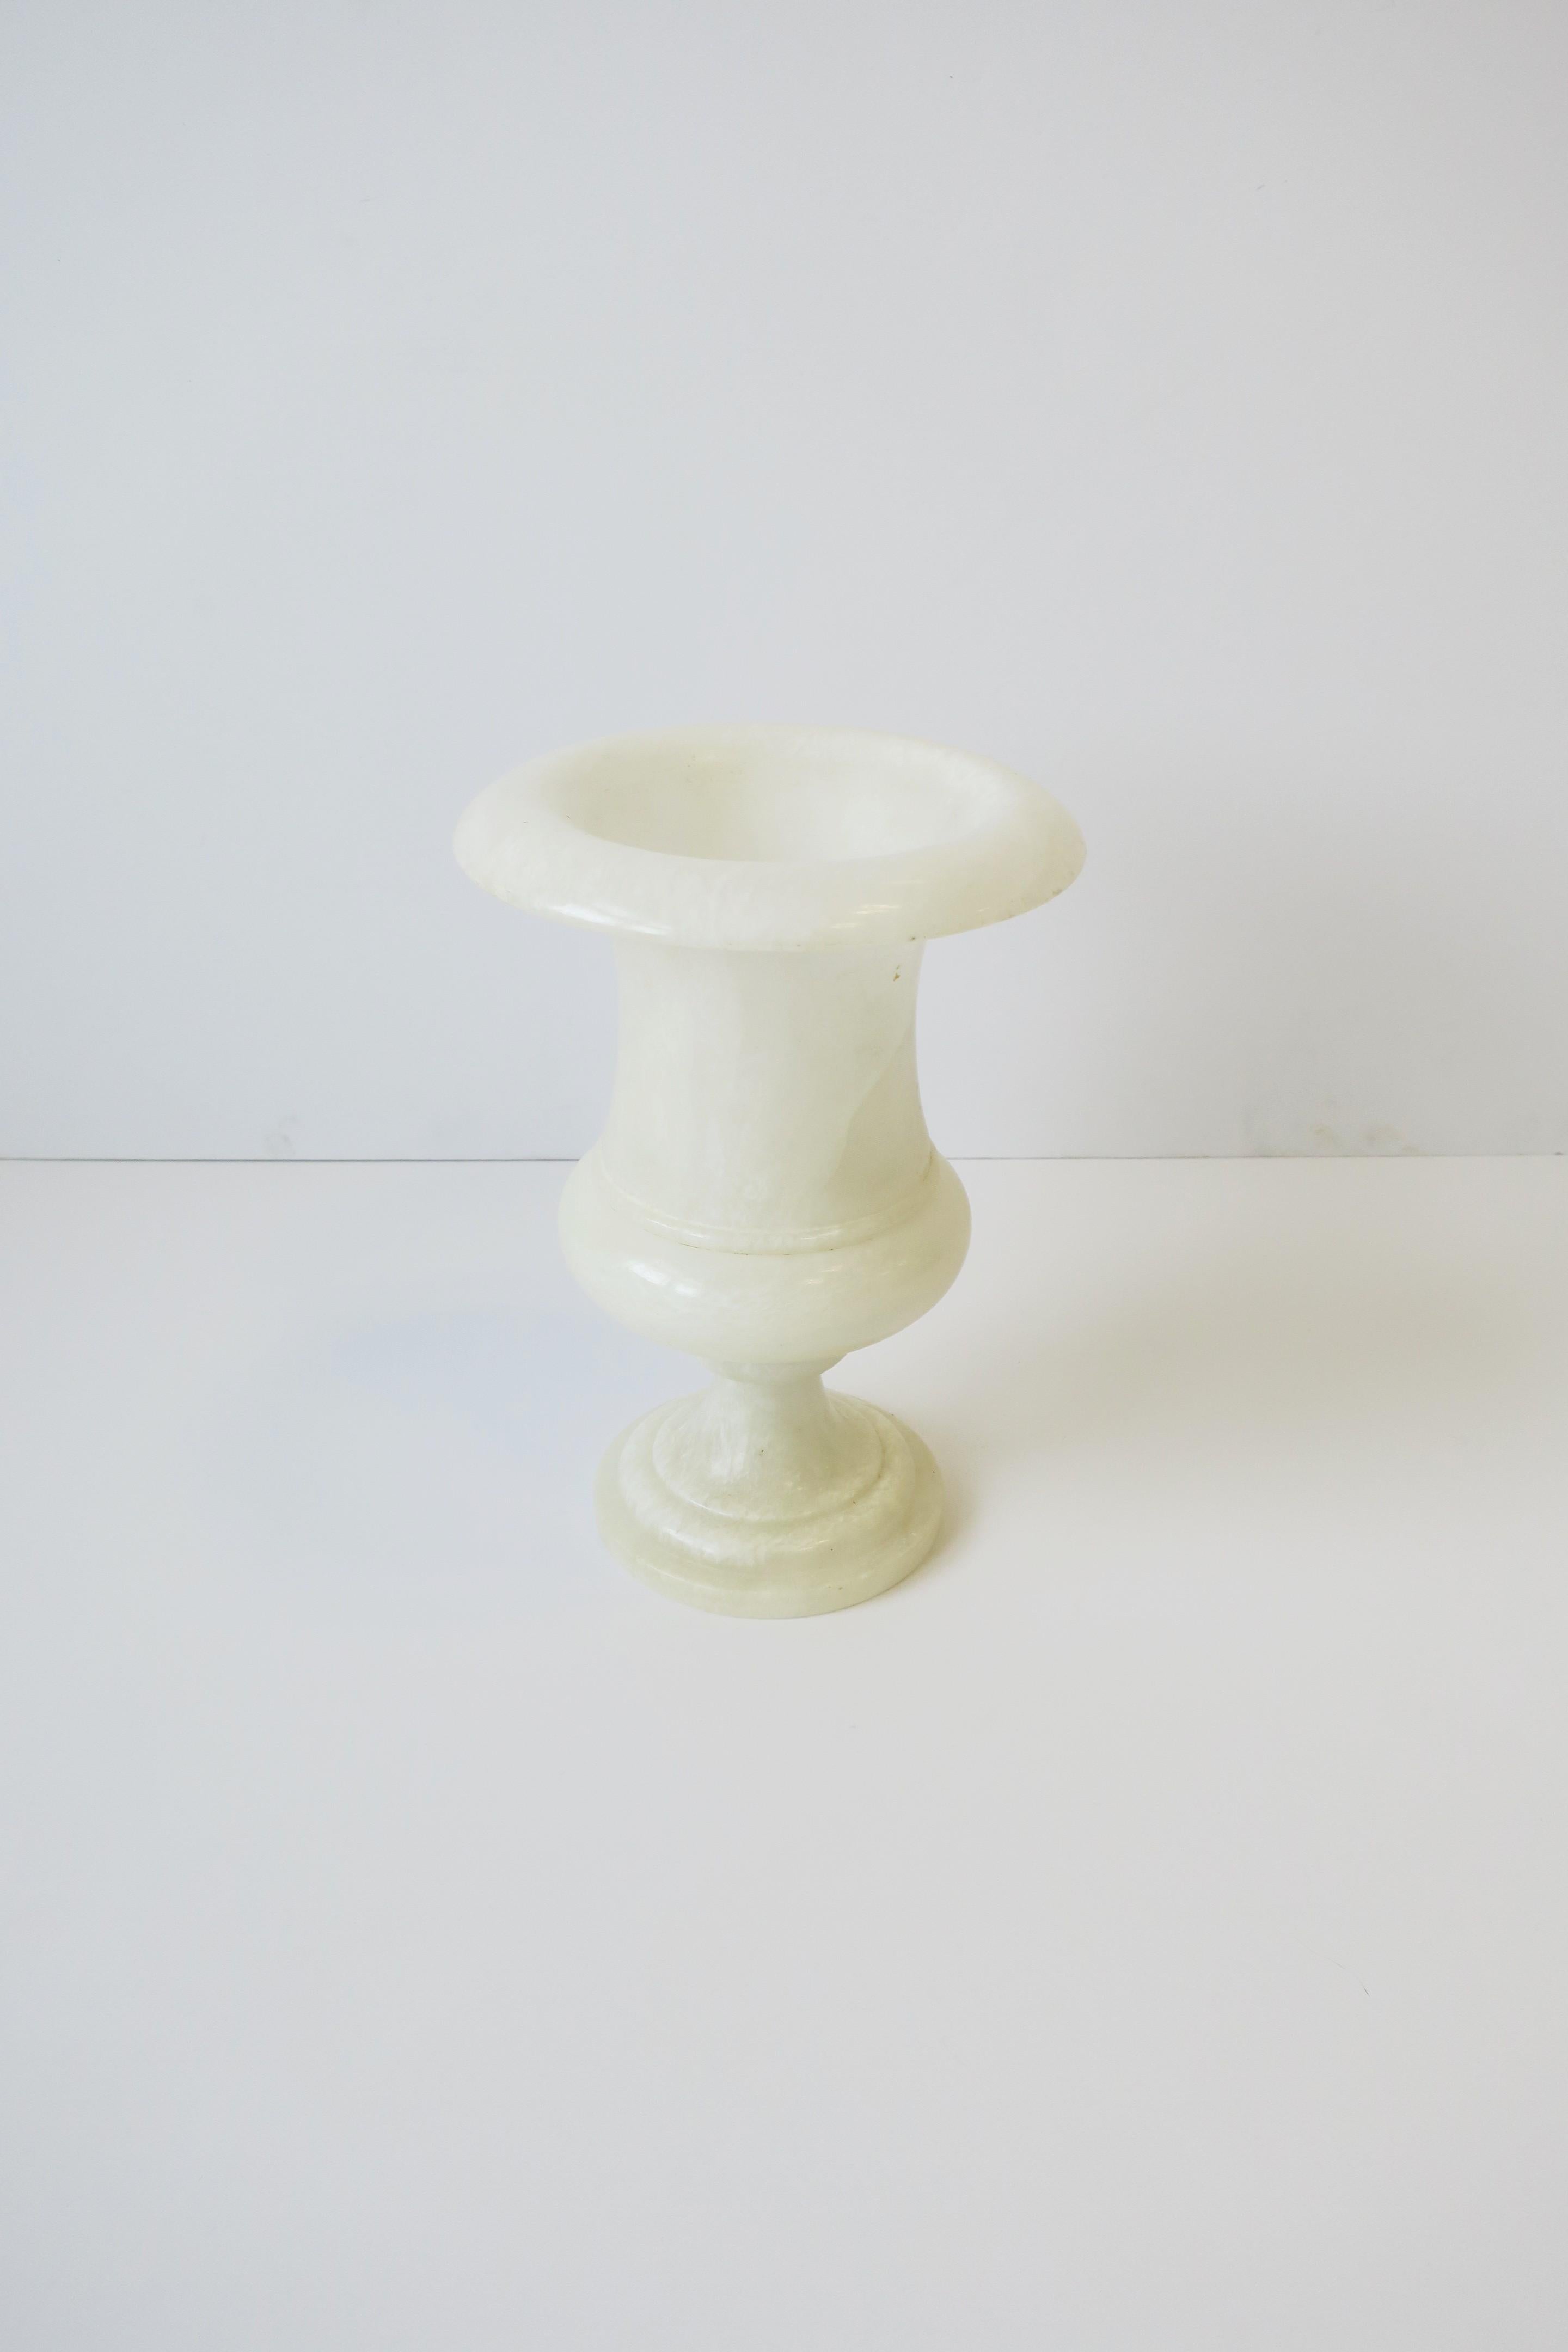 Neoclassical European White Alabaster Marble Urn from Spain